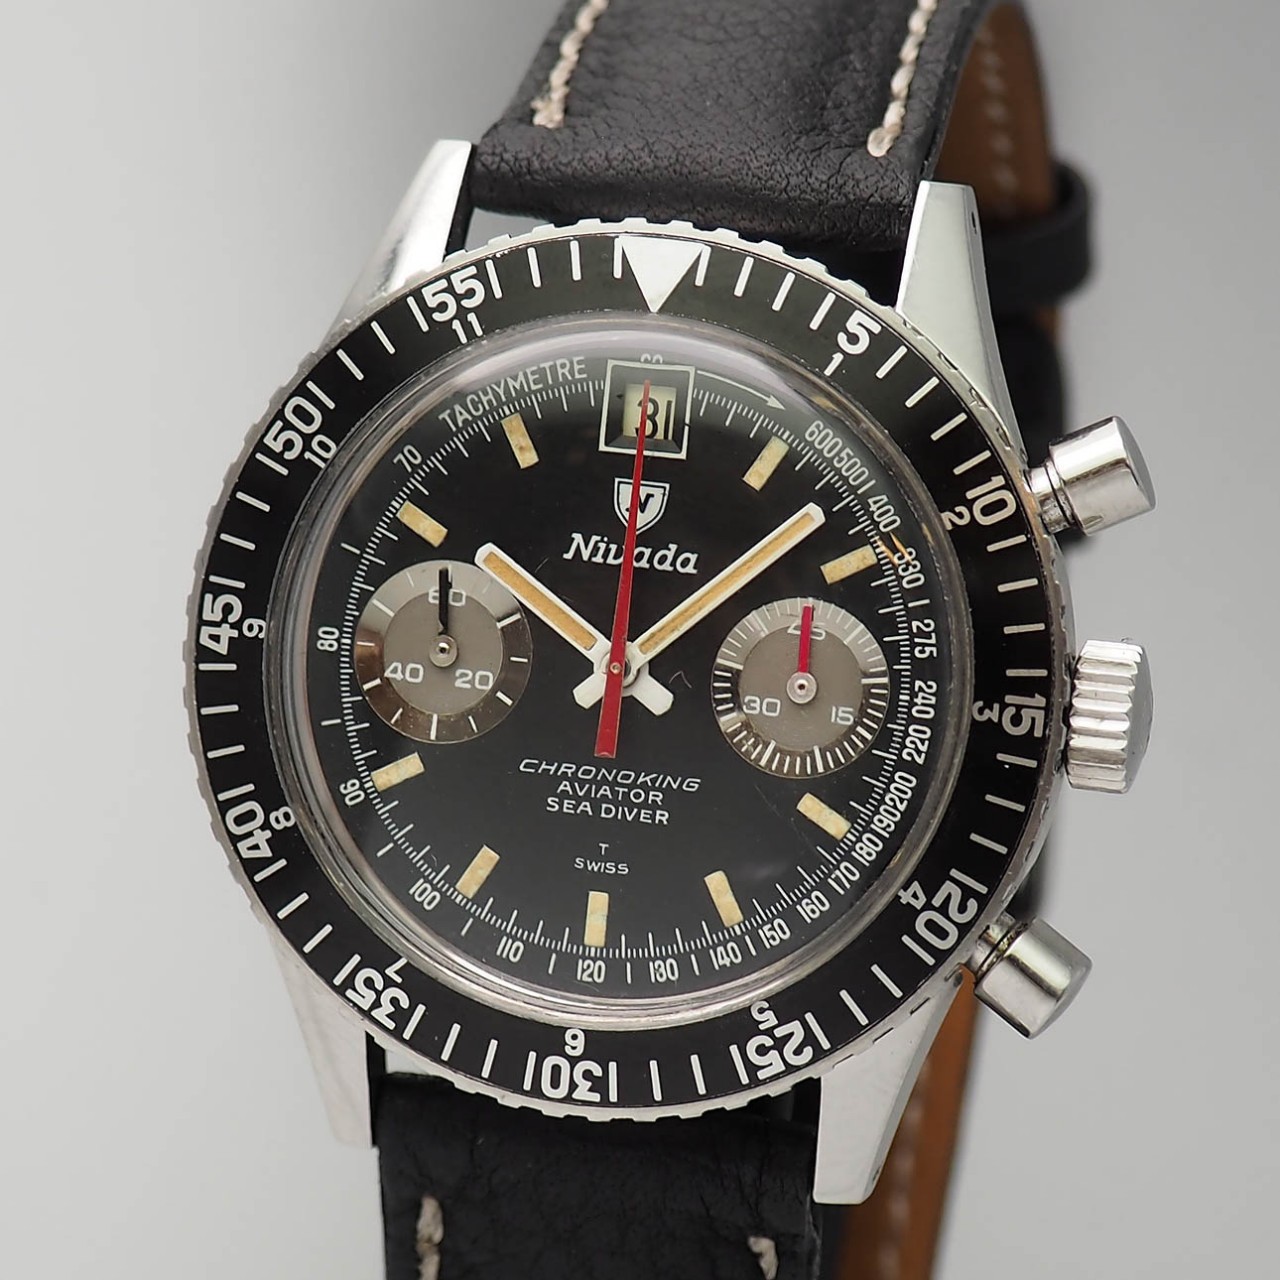 Nivada Grenchen Sea-Diver Chronograph &quot;ChronoKing&quot; Valjoux 23,very rare